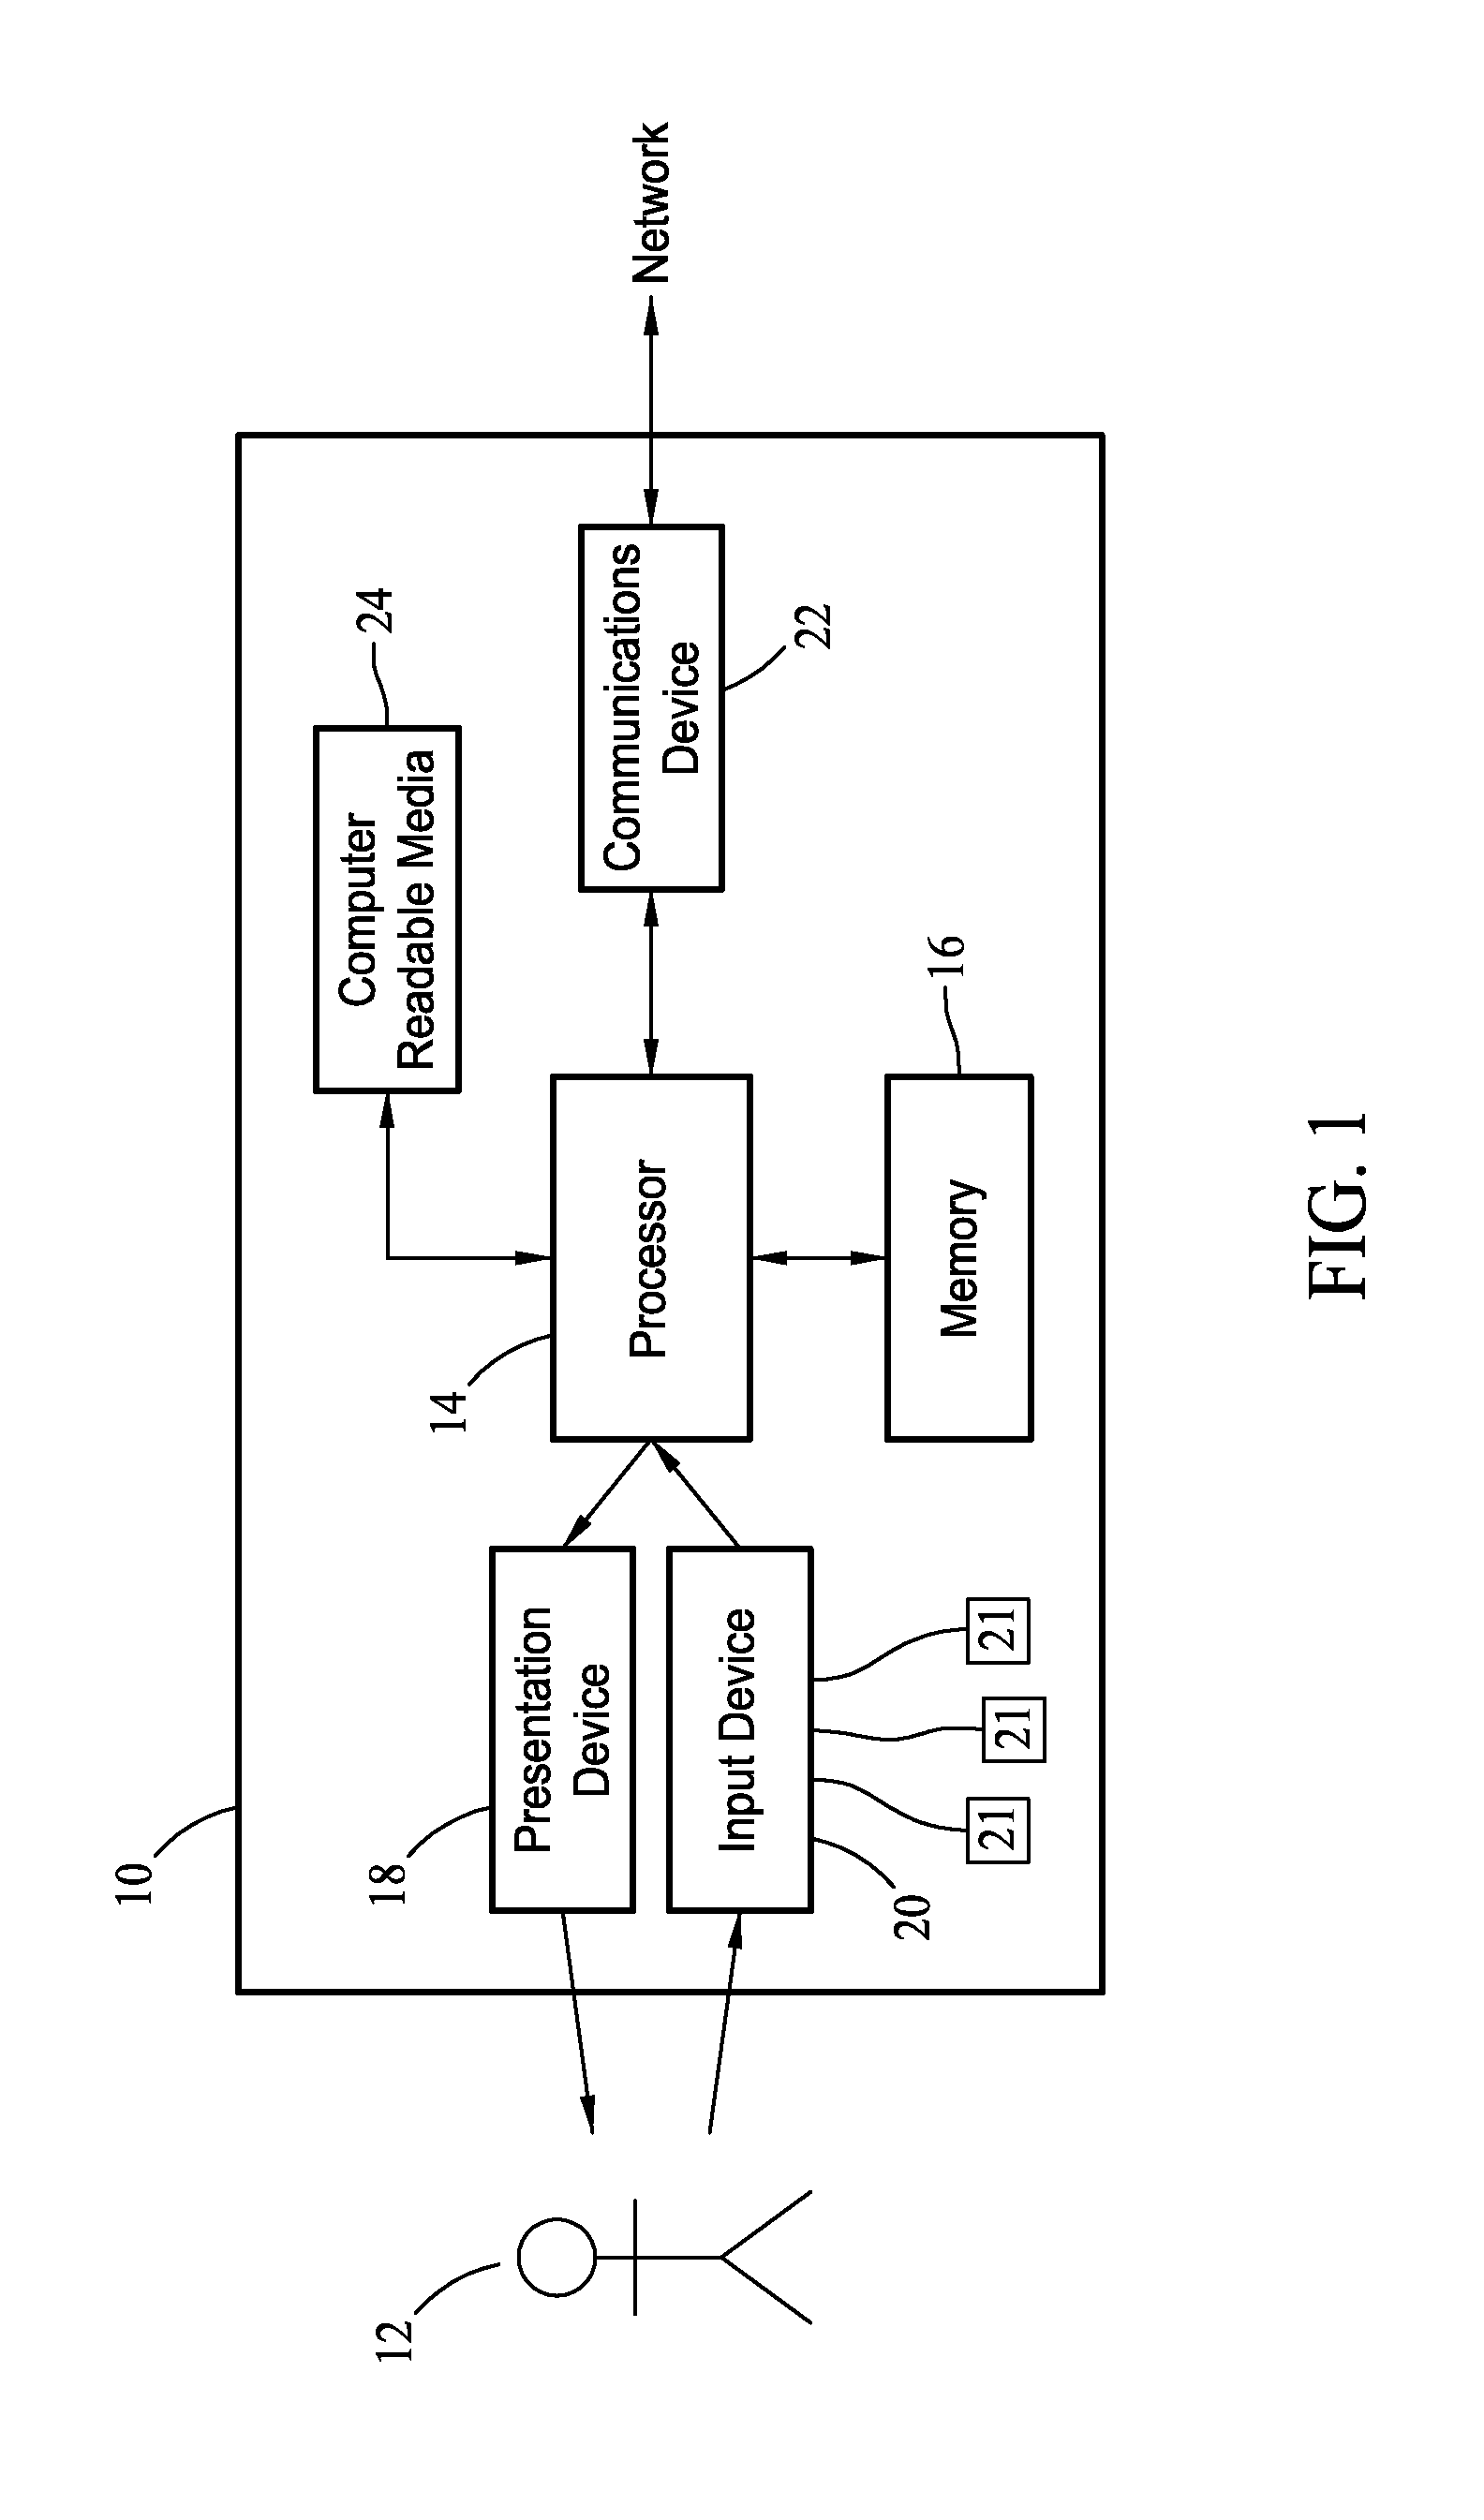 Systems and methods for use in diagnosing a medical condition of a patient